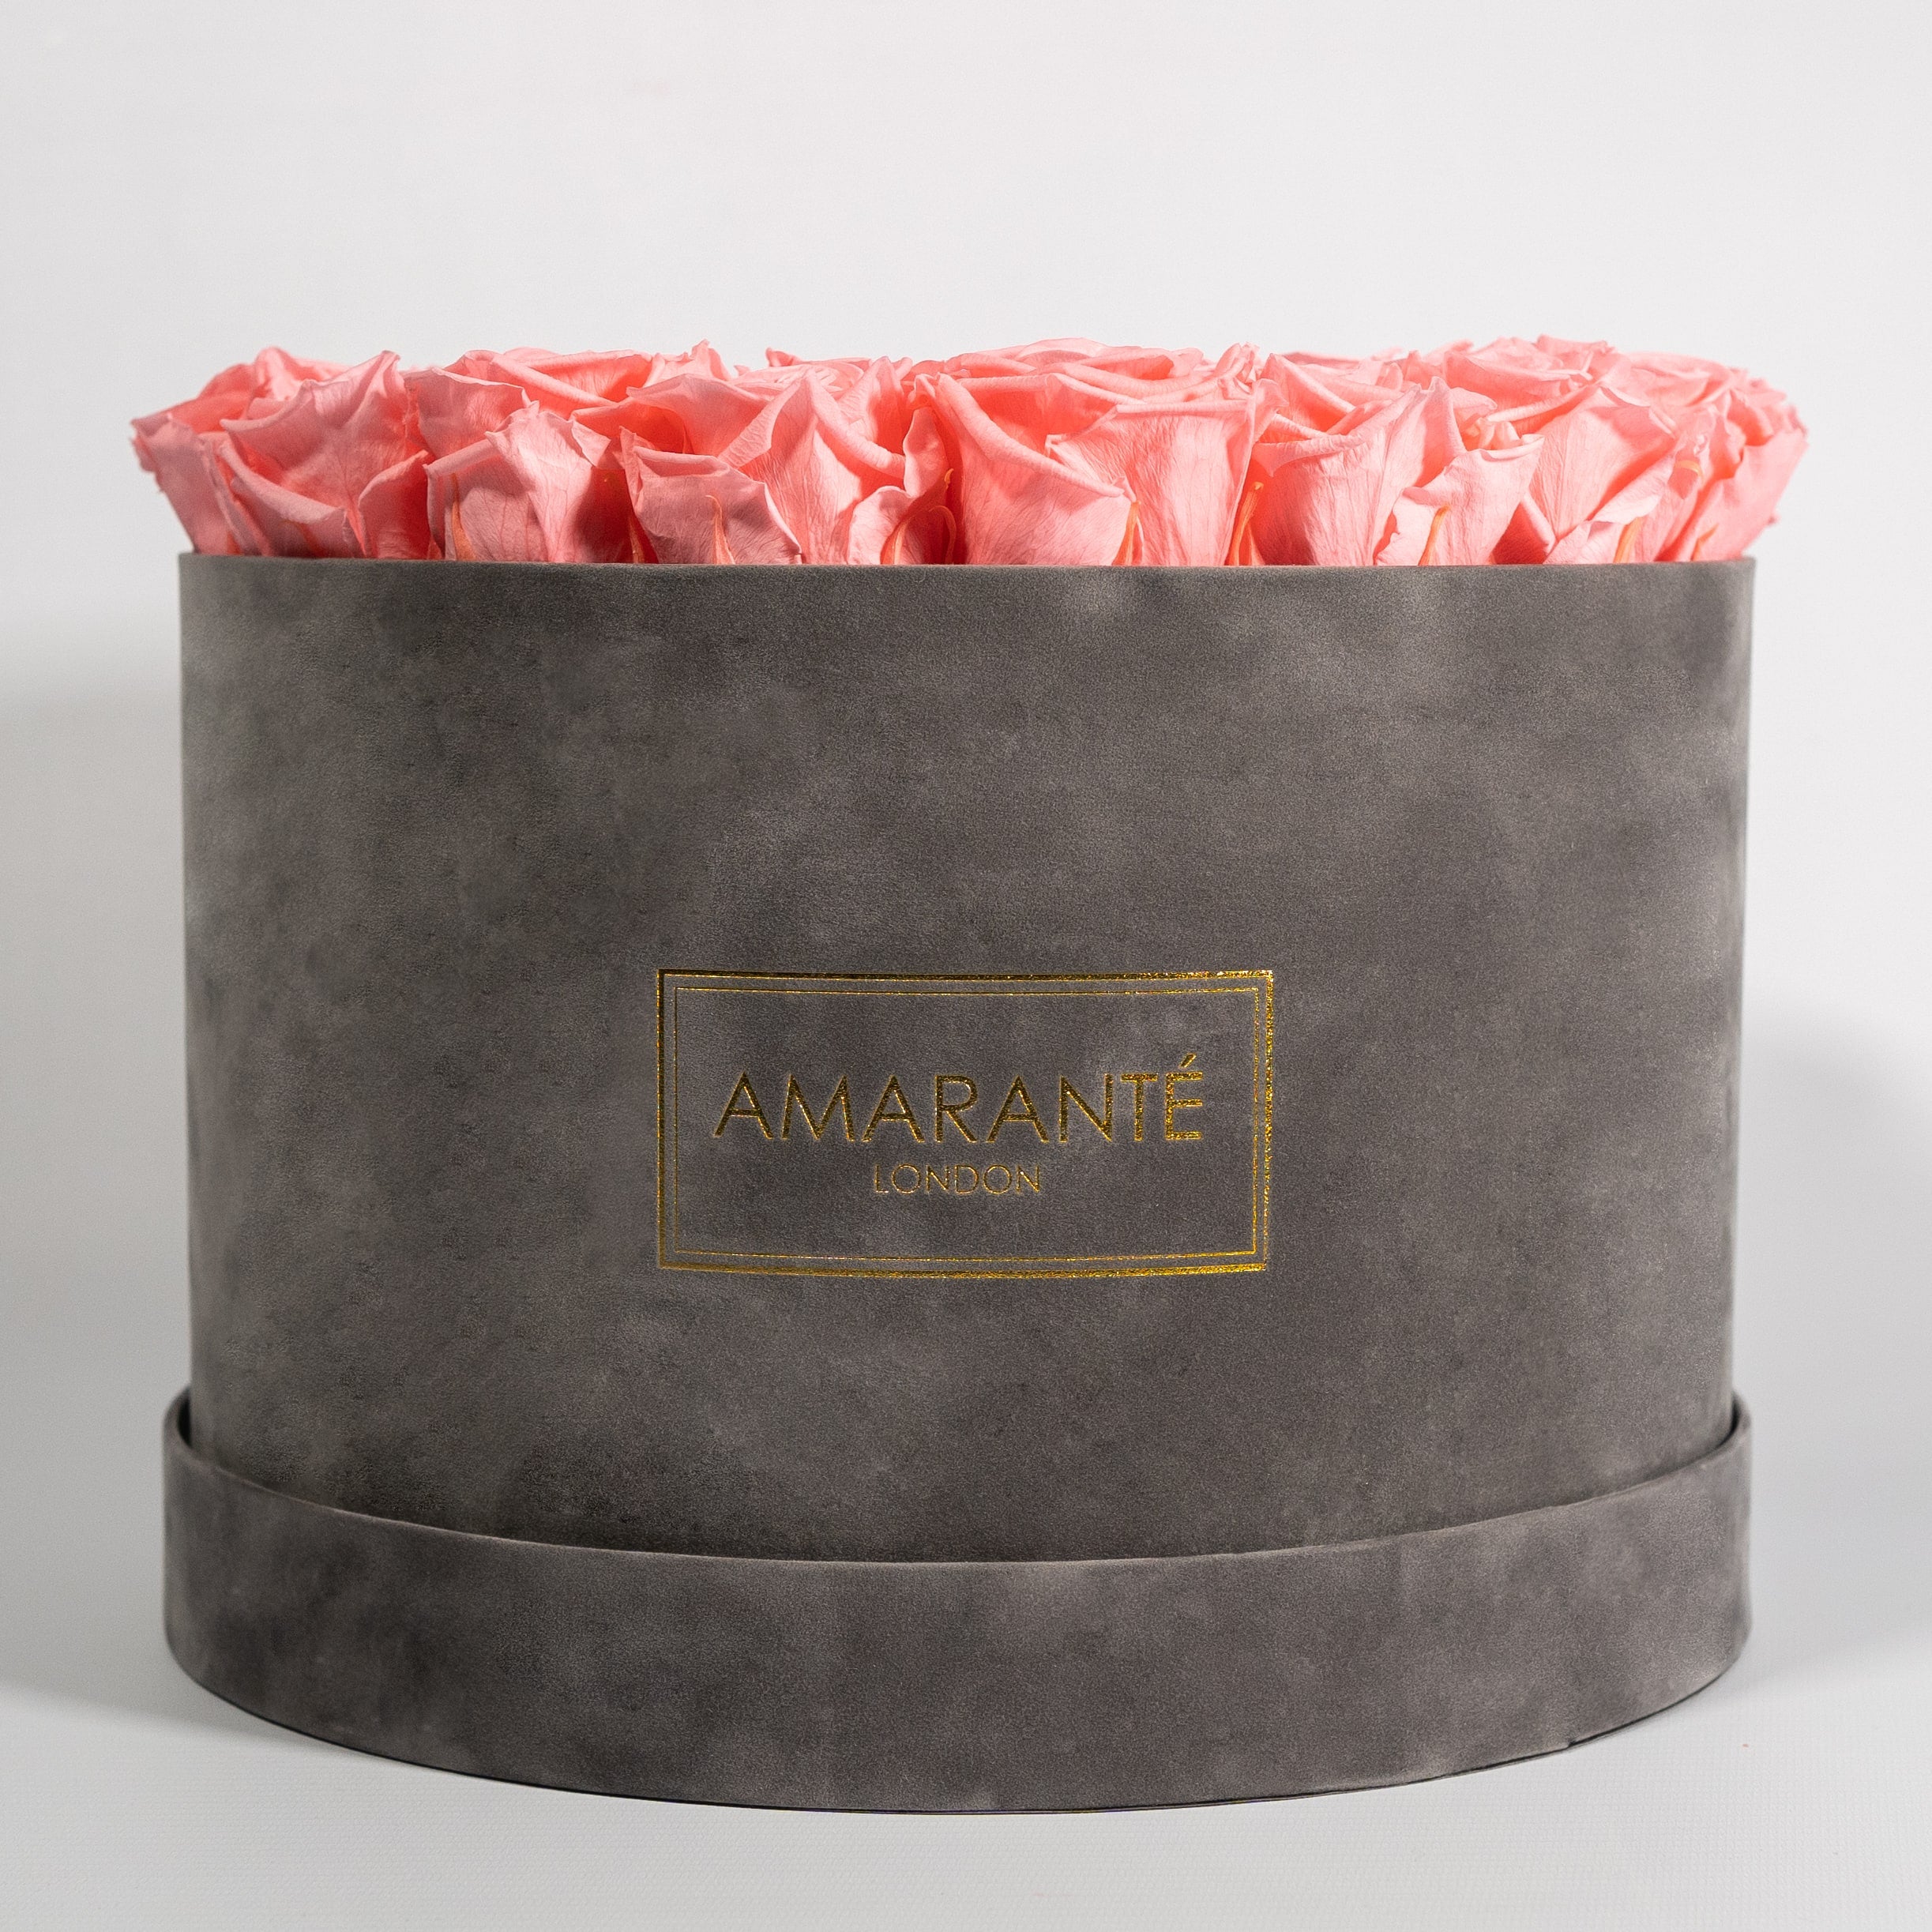 Blushing light pink Roses, the perfect gift to show gratitude and security.